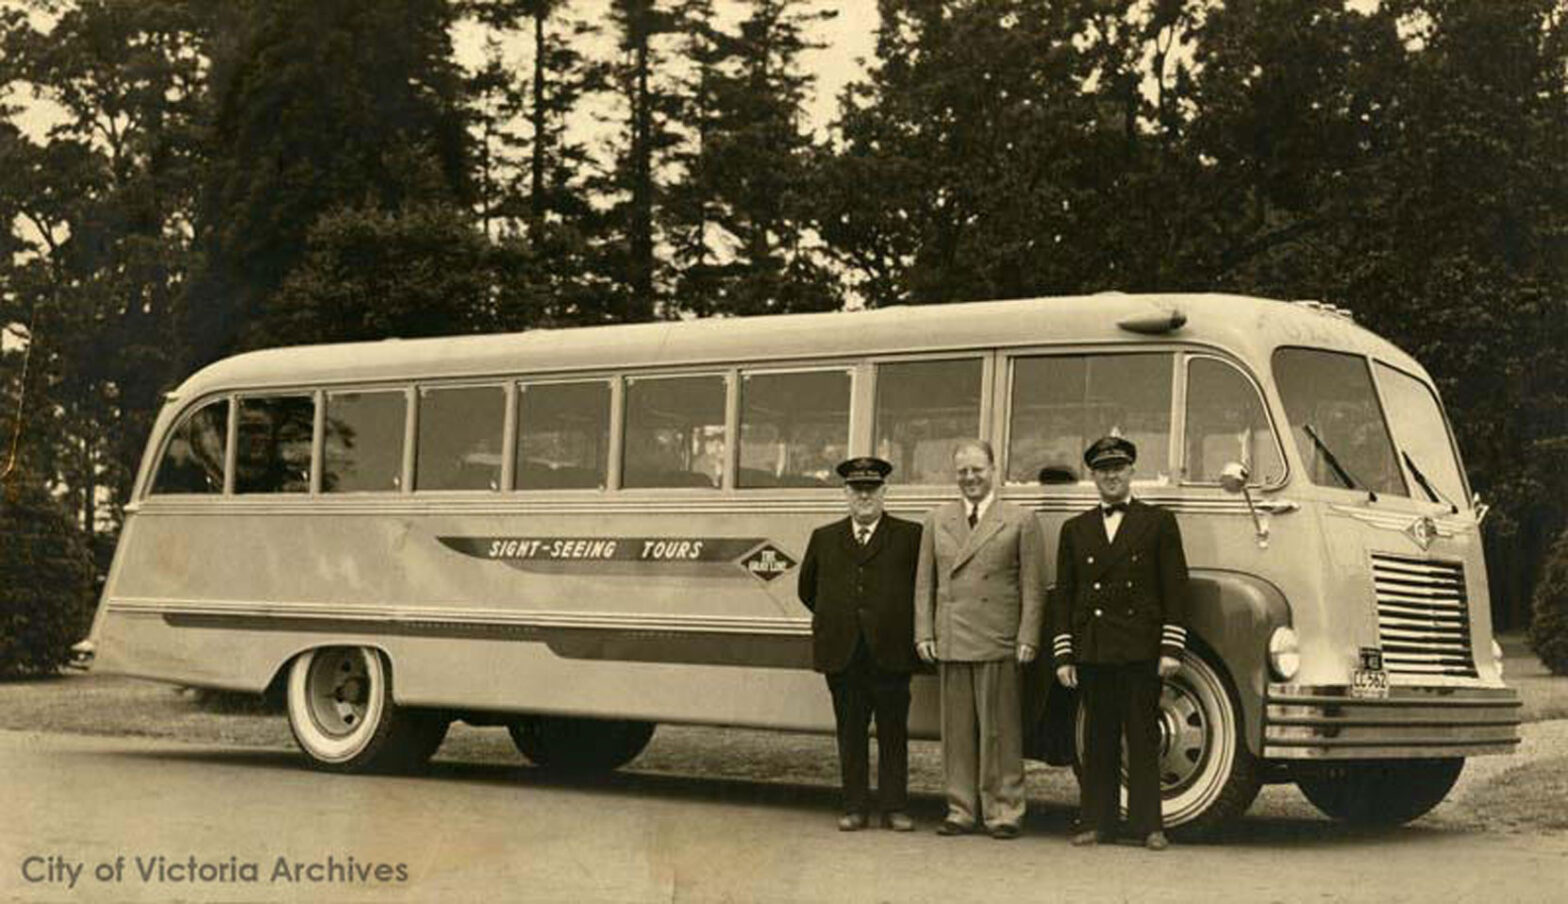 George "Rebel" Mowat (right) with the first converted sightseeing bus received by Gray Line of Victoria, 1940. The other two men in photograph are Angus "Winnipeg" Chilton, Harold Husband (photo: City of Victoria Archives)